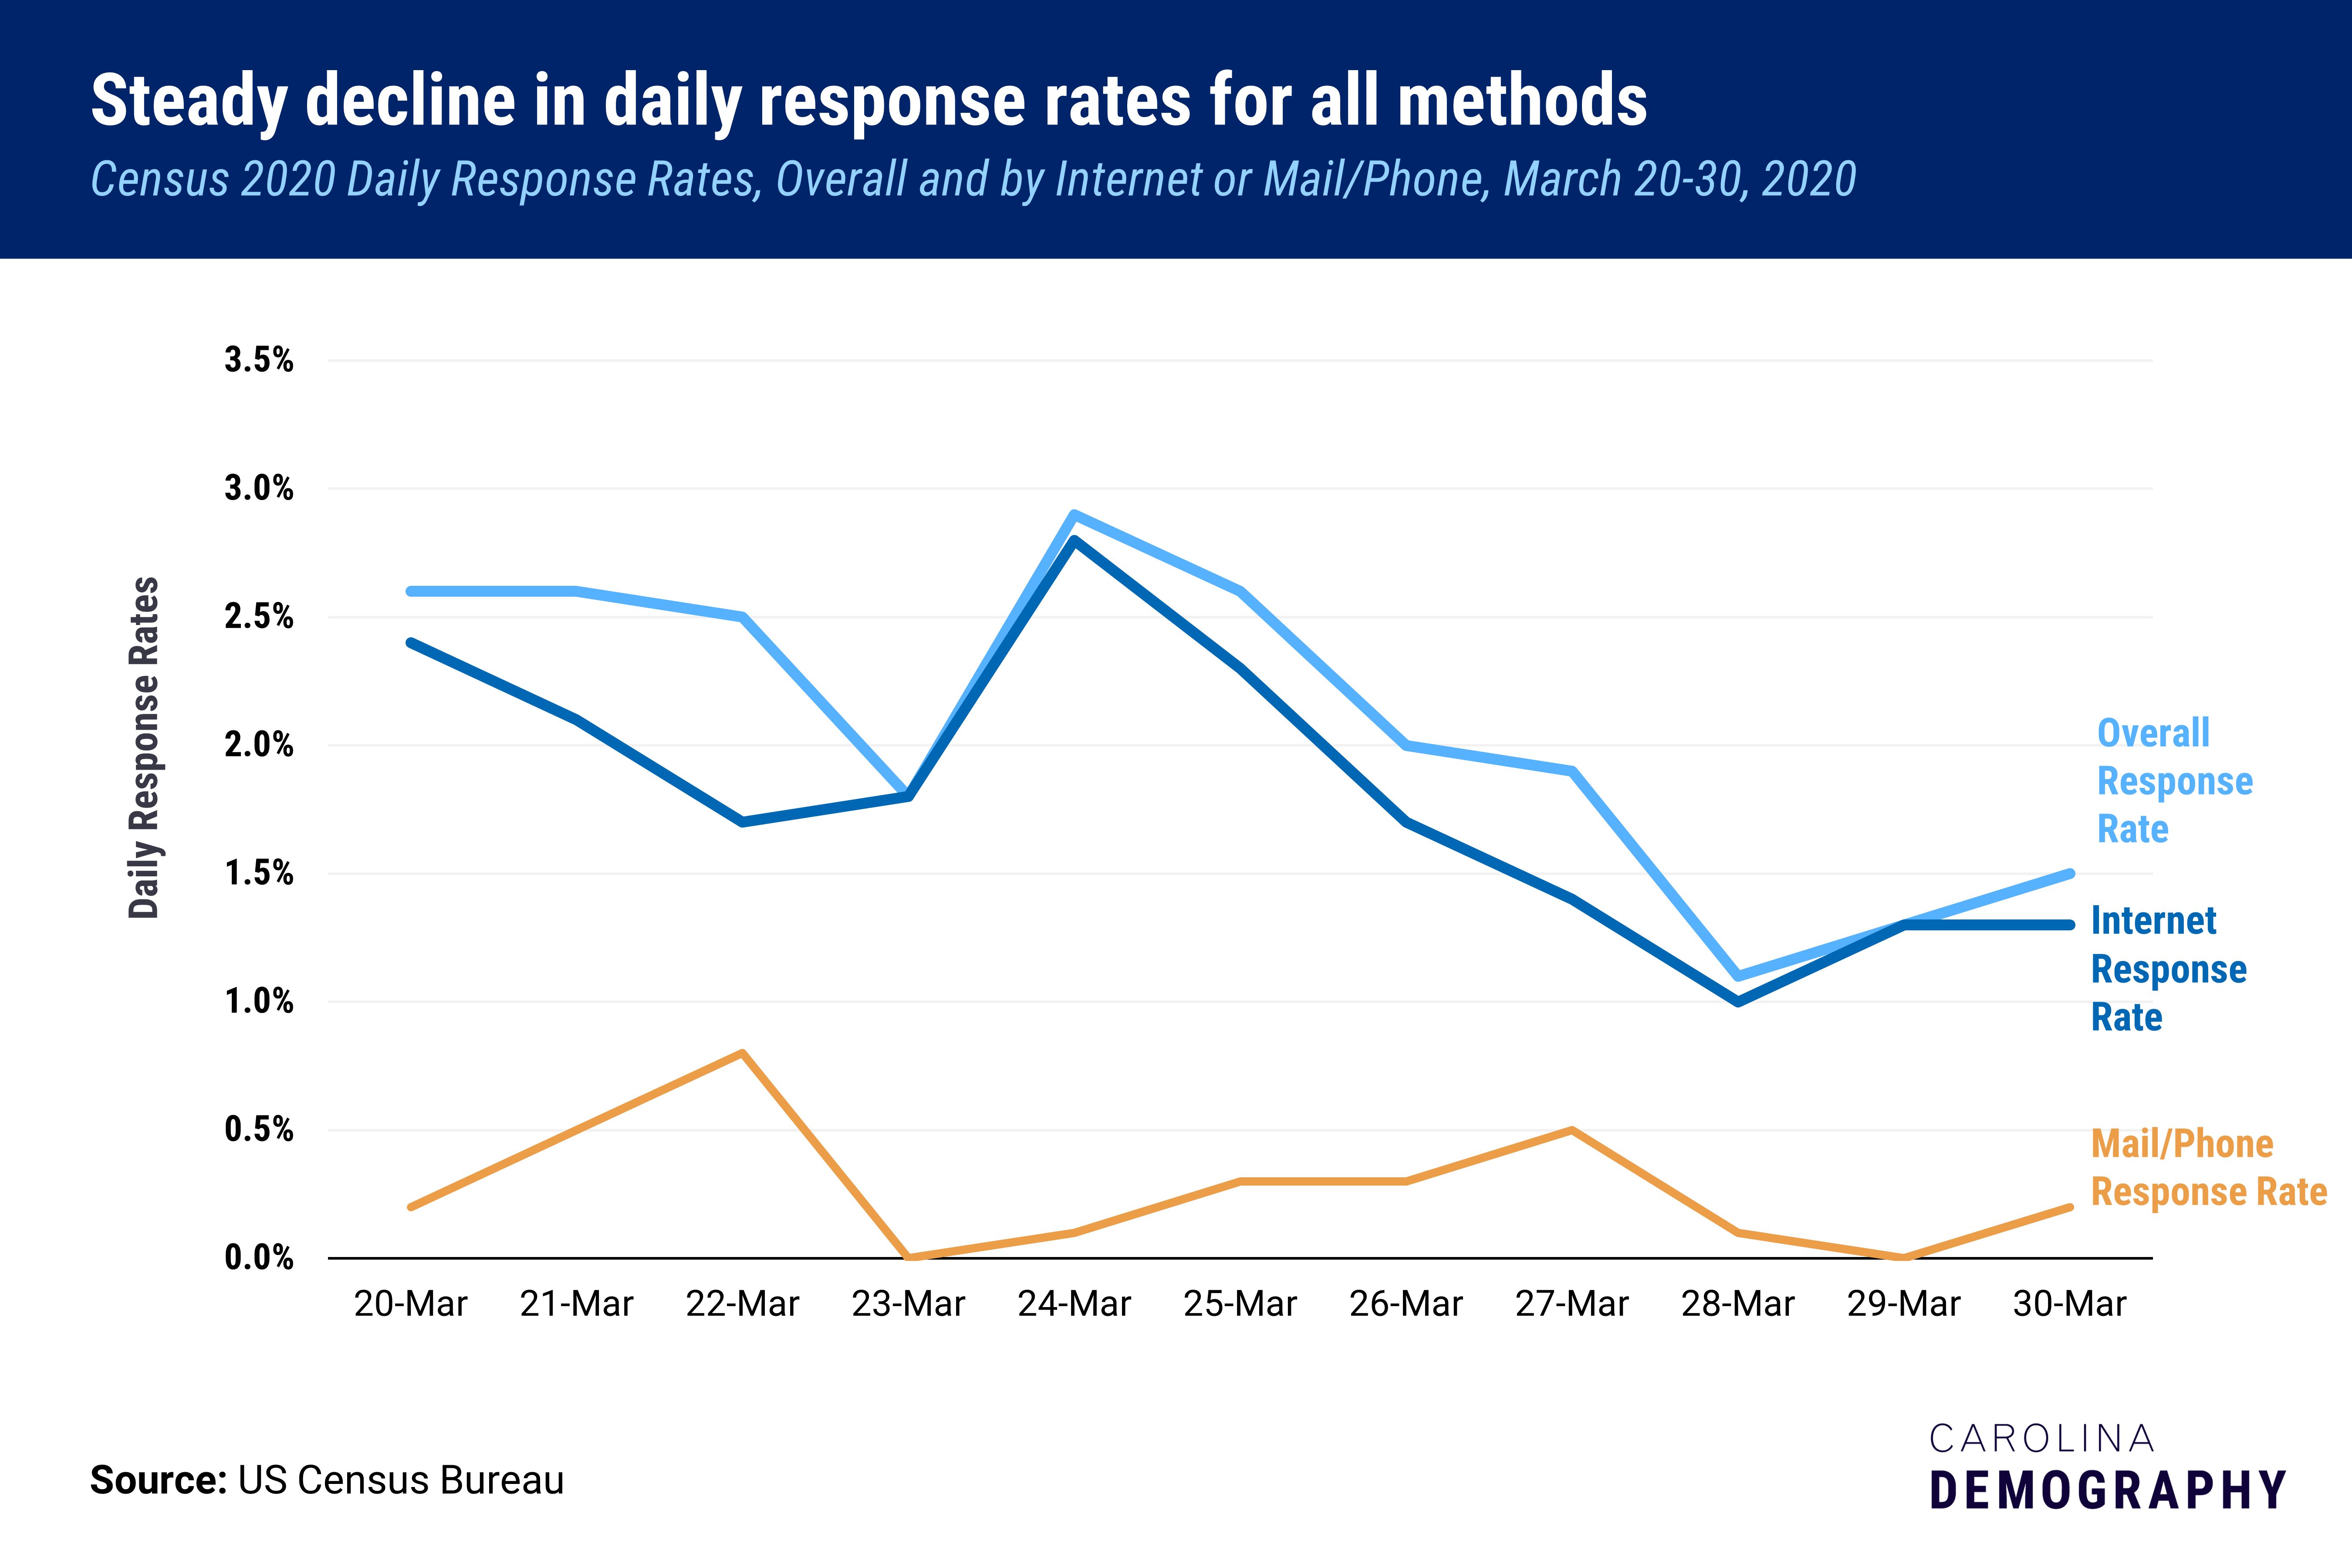 graph showing a steady decline in daily census response rates in North Carolina through march 30th, 2020